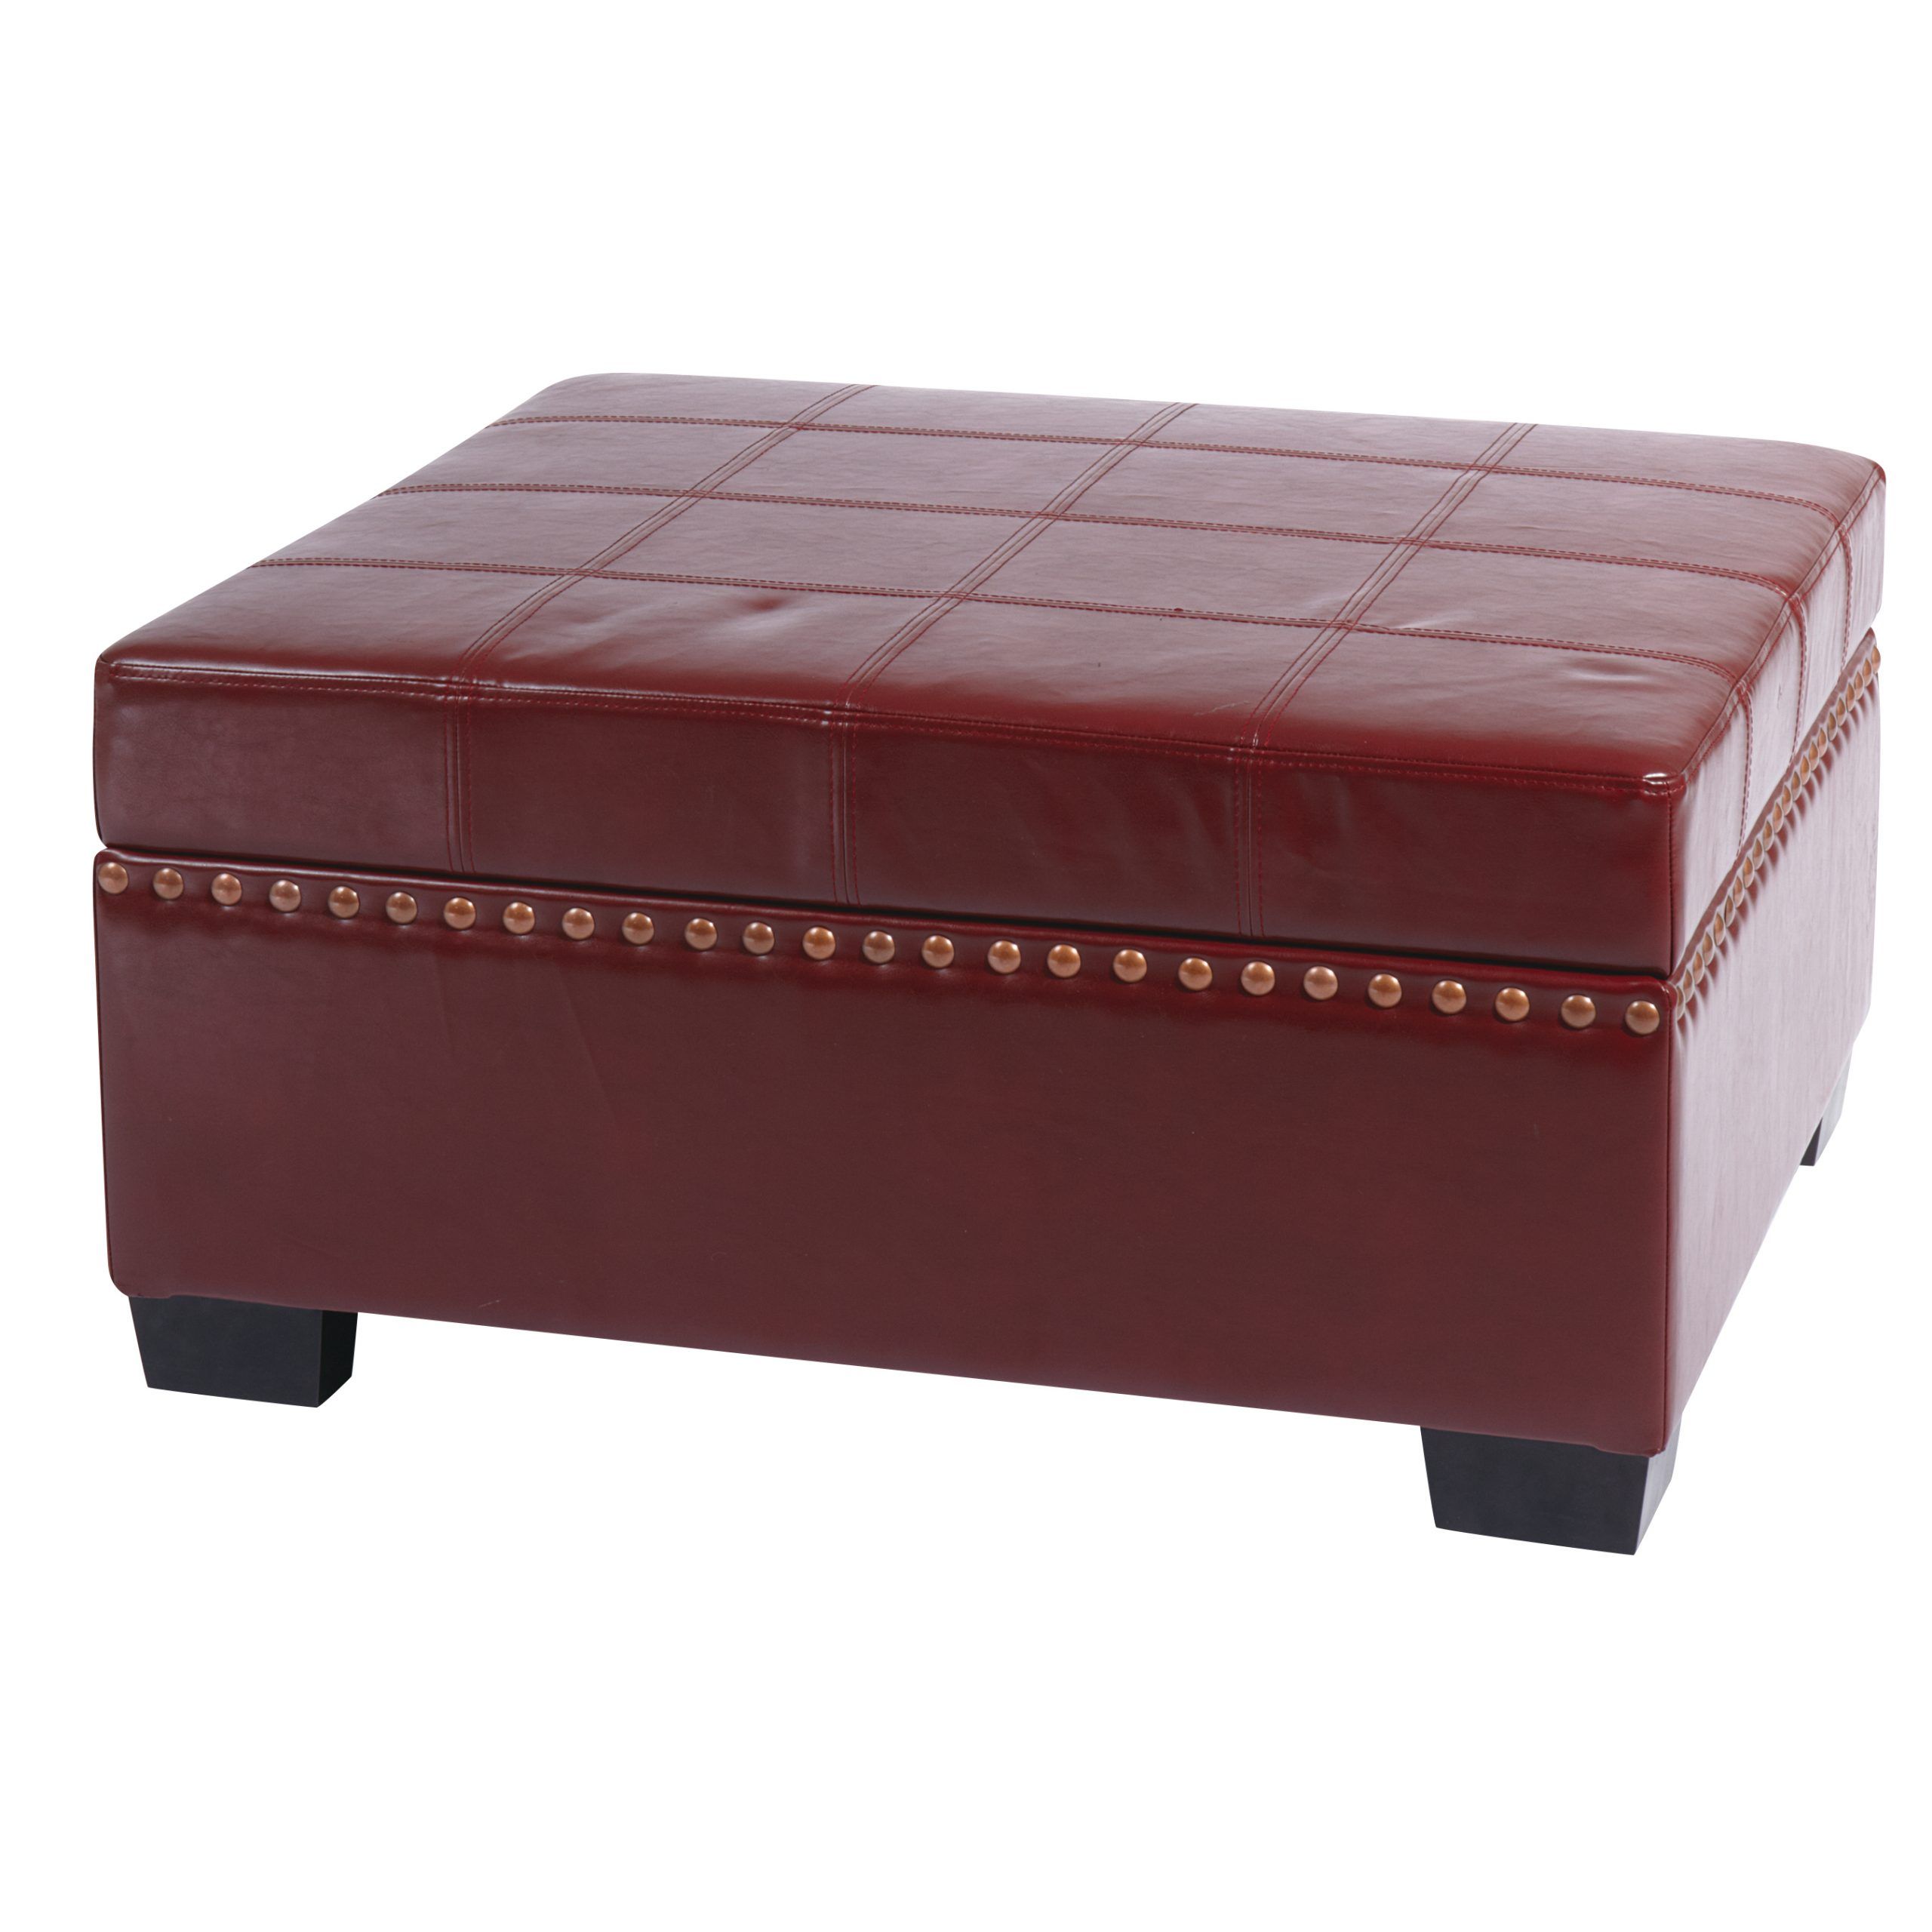 Red Fabric Square Storage Ottomans With Pillows Inside Most Current Nailhead Detour Storage Ottoman With Tray, Multiple Colors – Walmart (View 9 of 10)